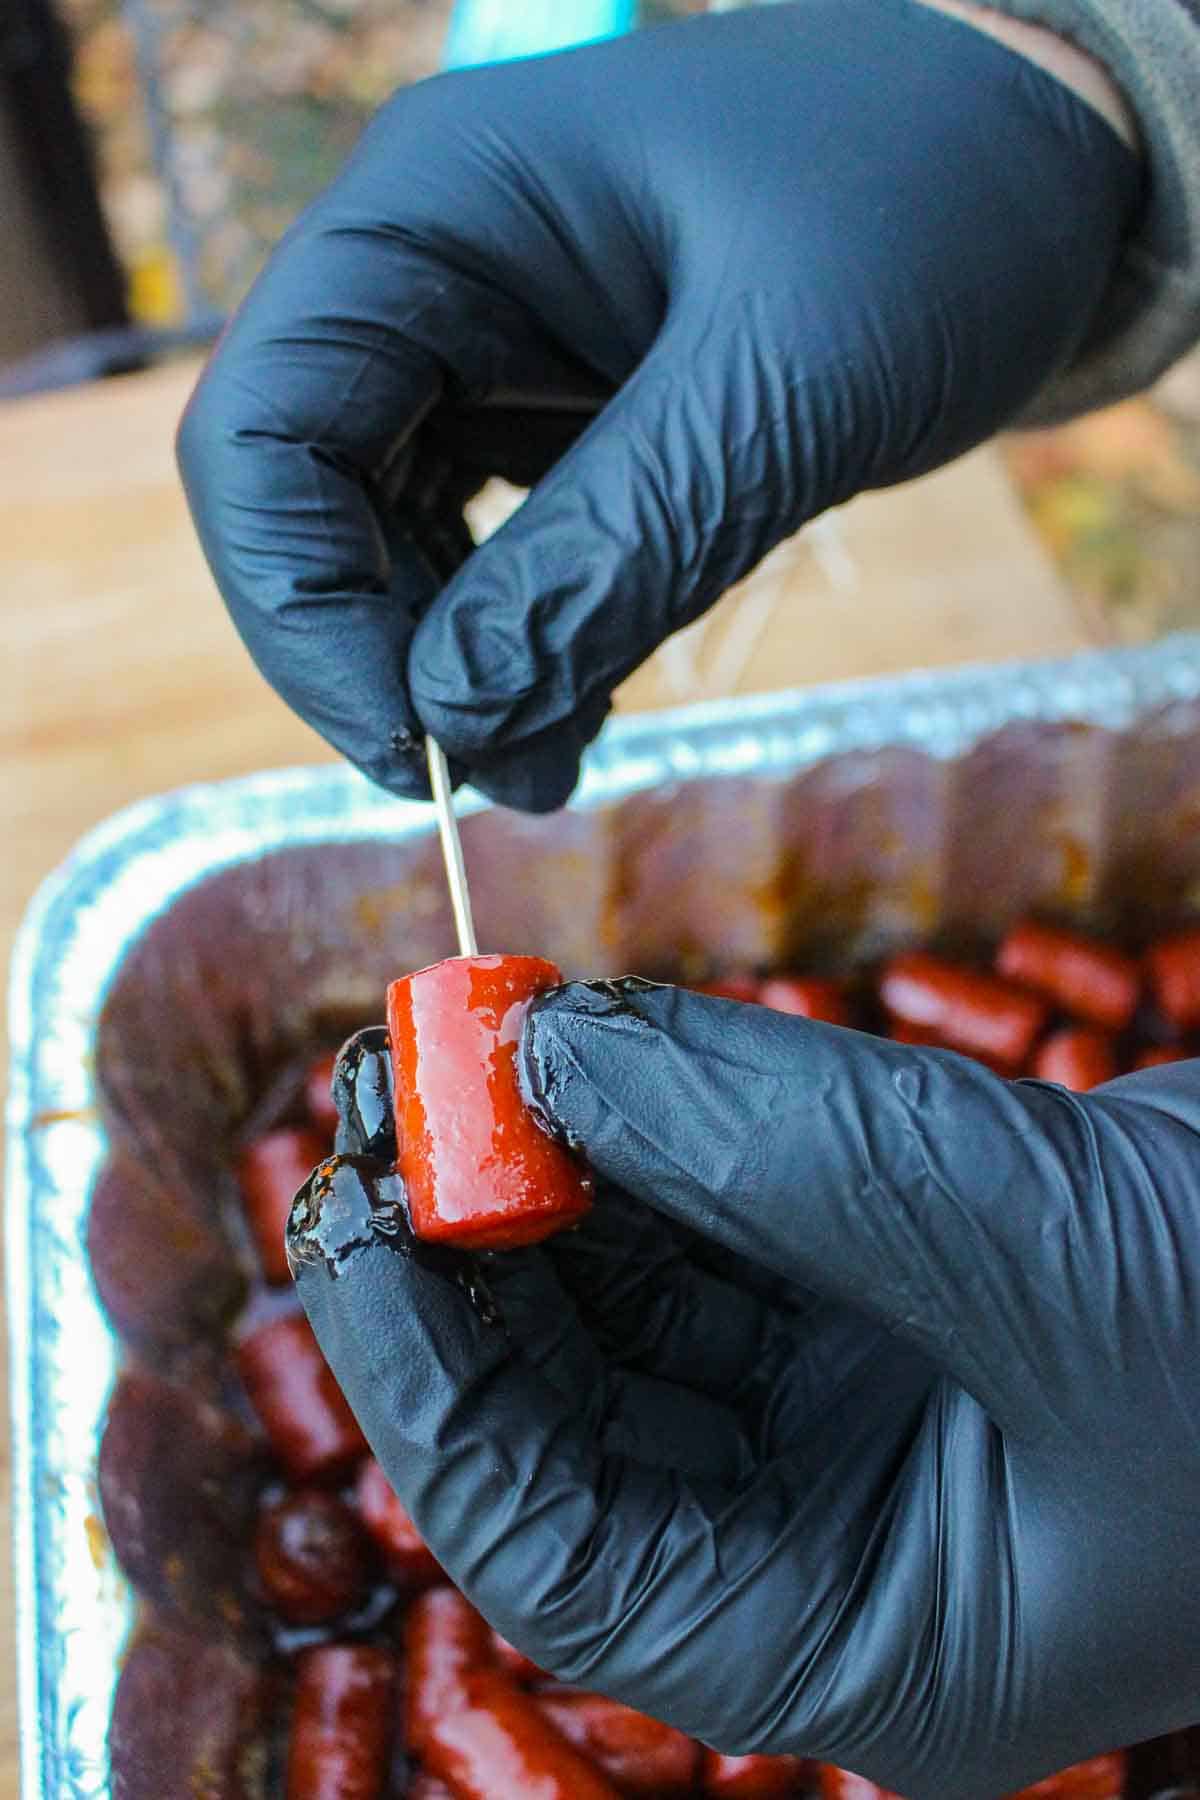 Placing a toothpick in one of the hot dog burnt ends.